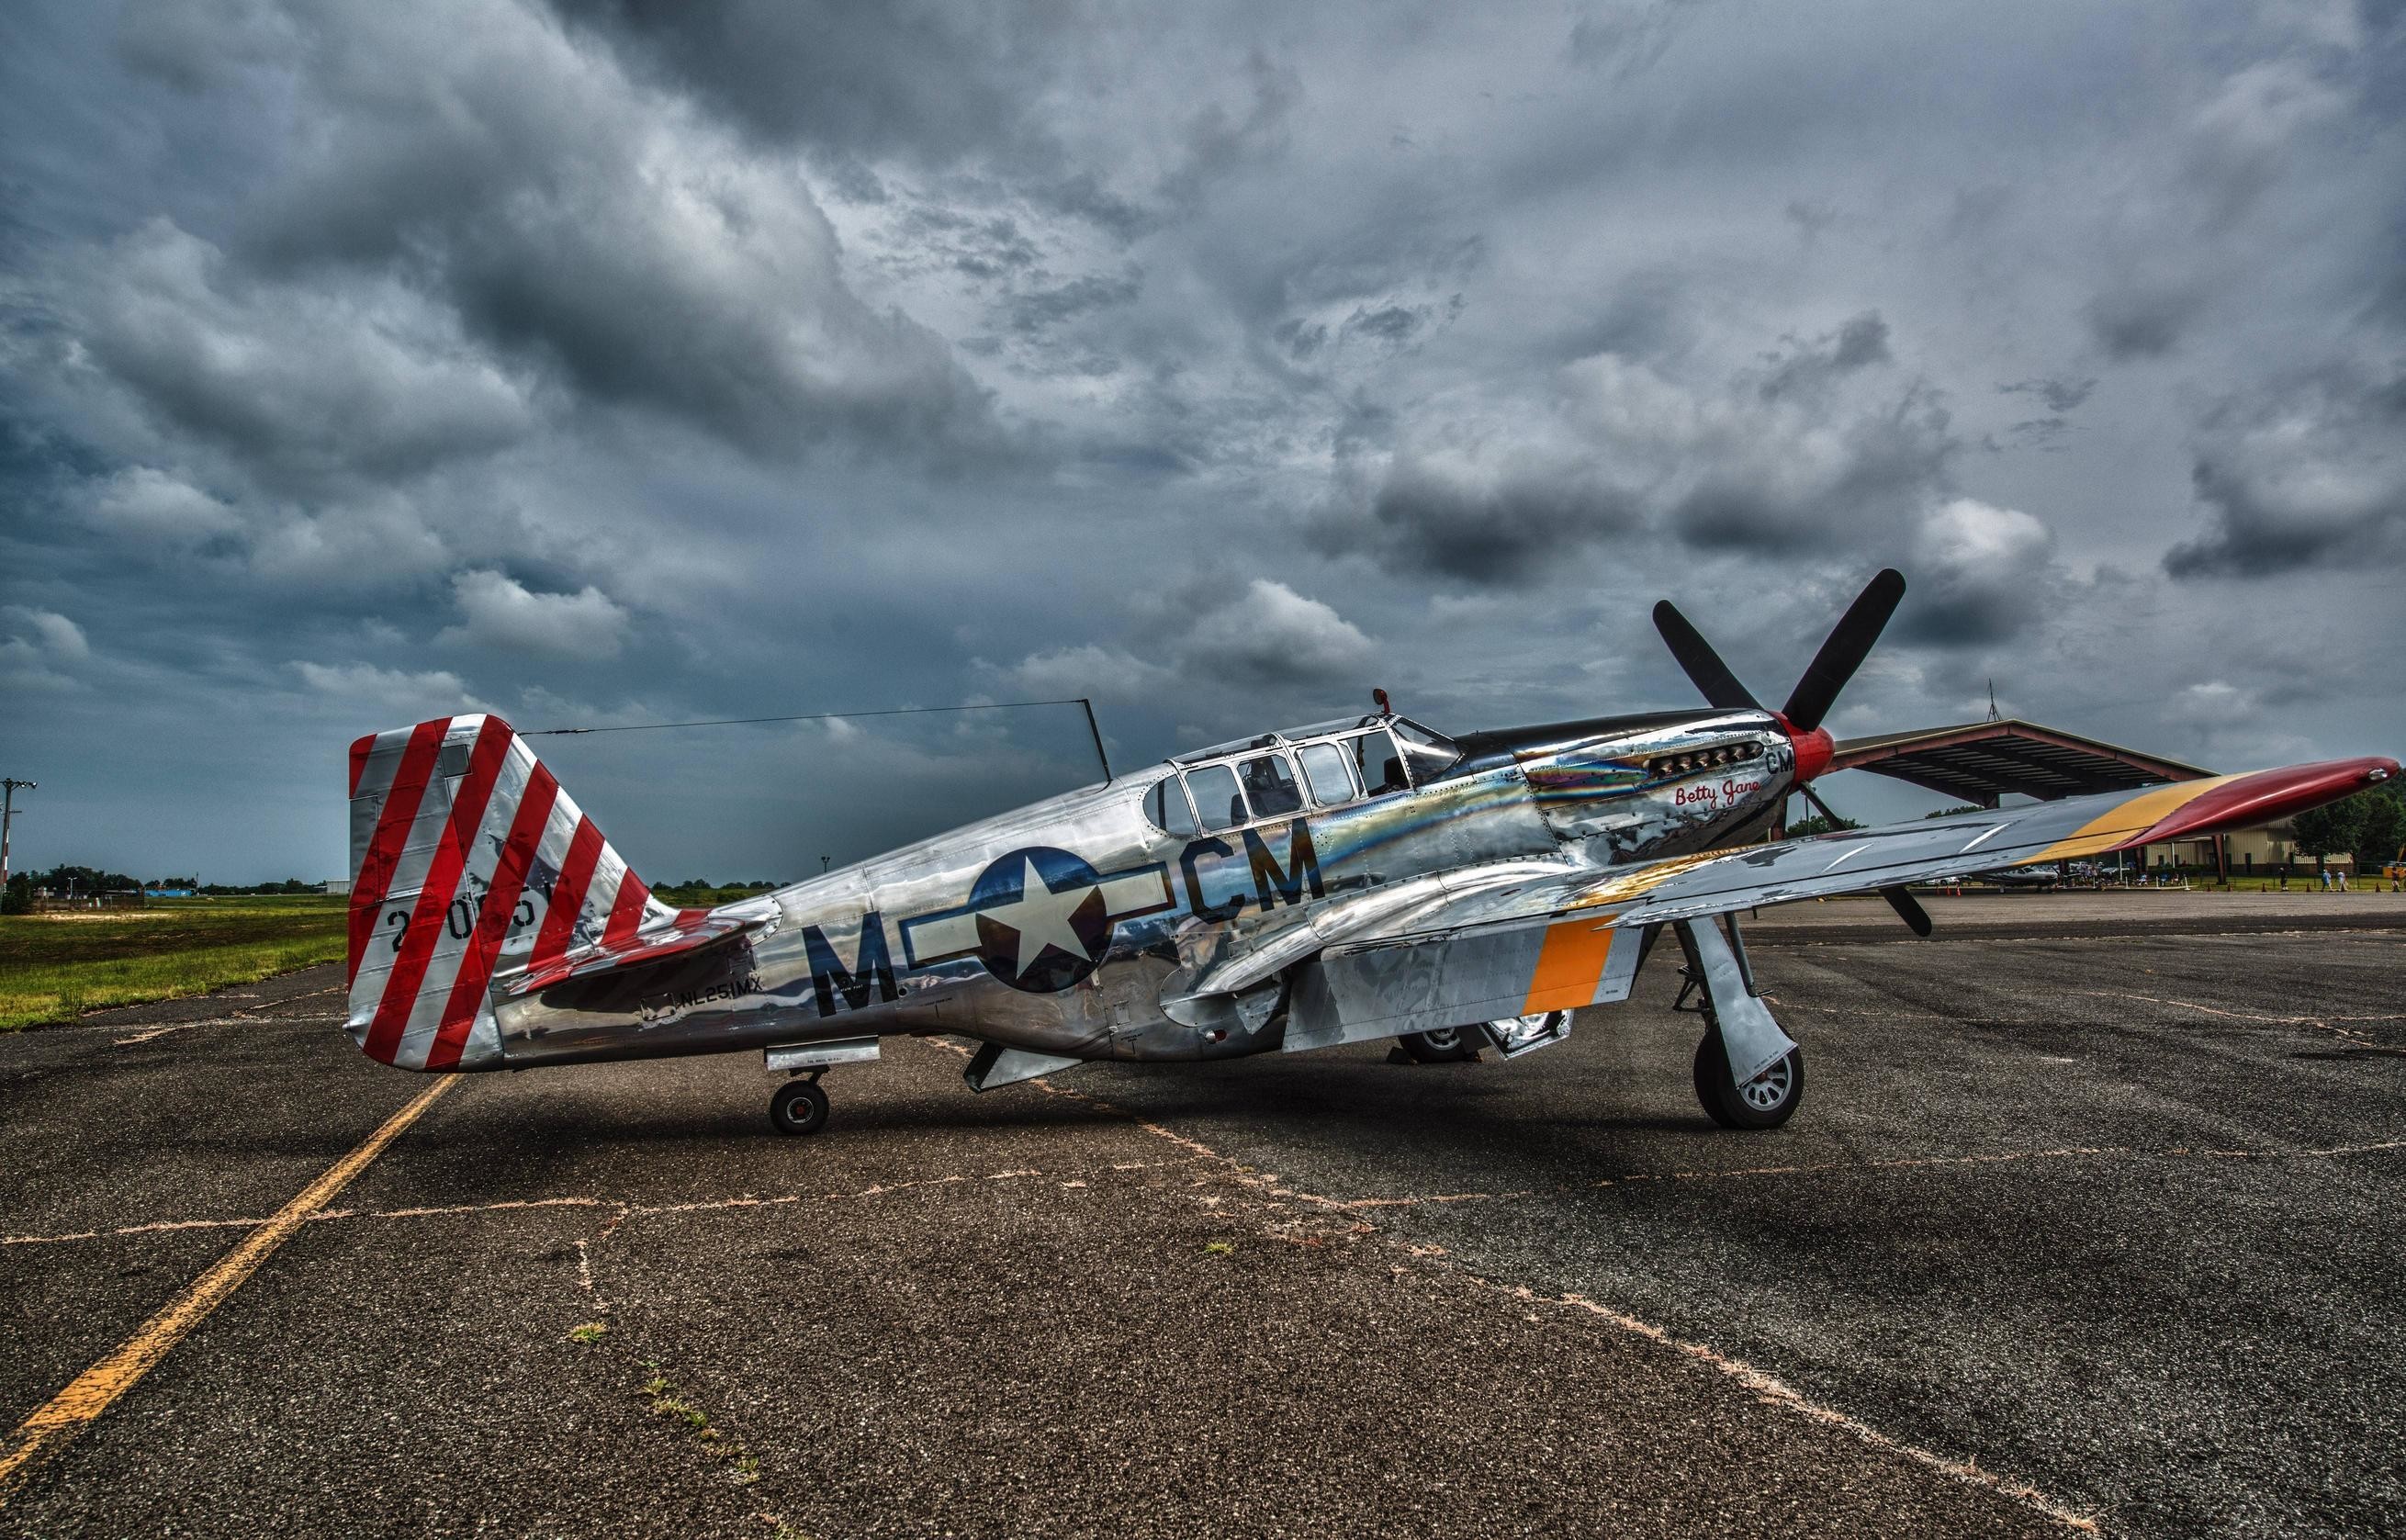 Vintage Airplane Wallpapers - P 51 Mustang Background , HD Wallpaper & Backgrounds